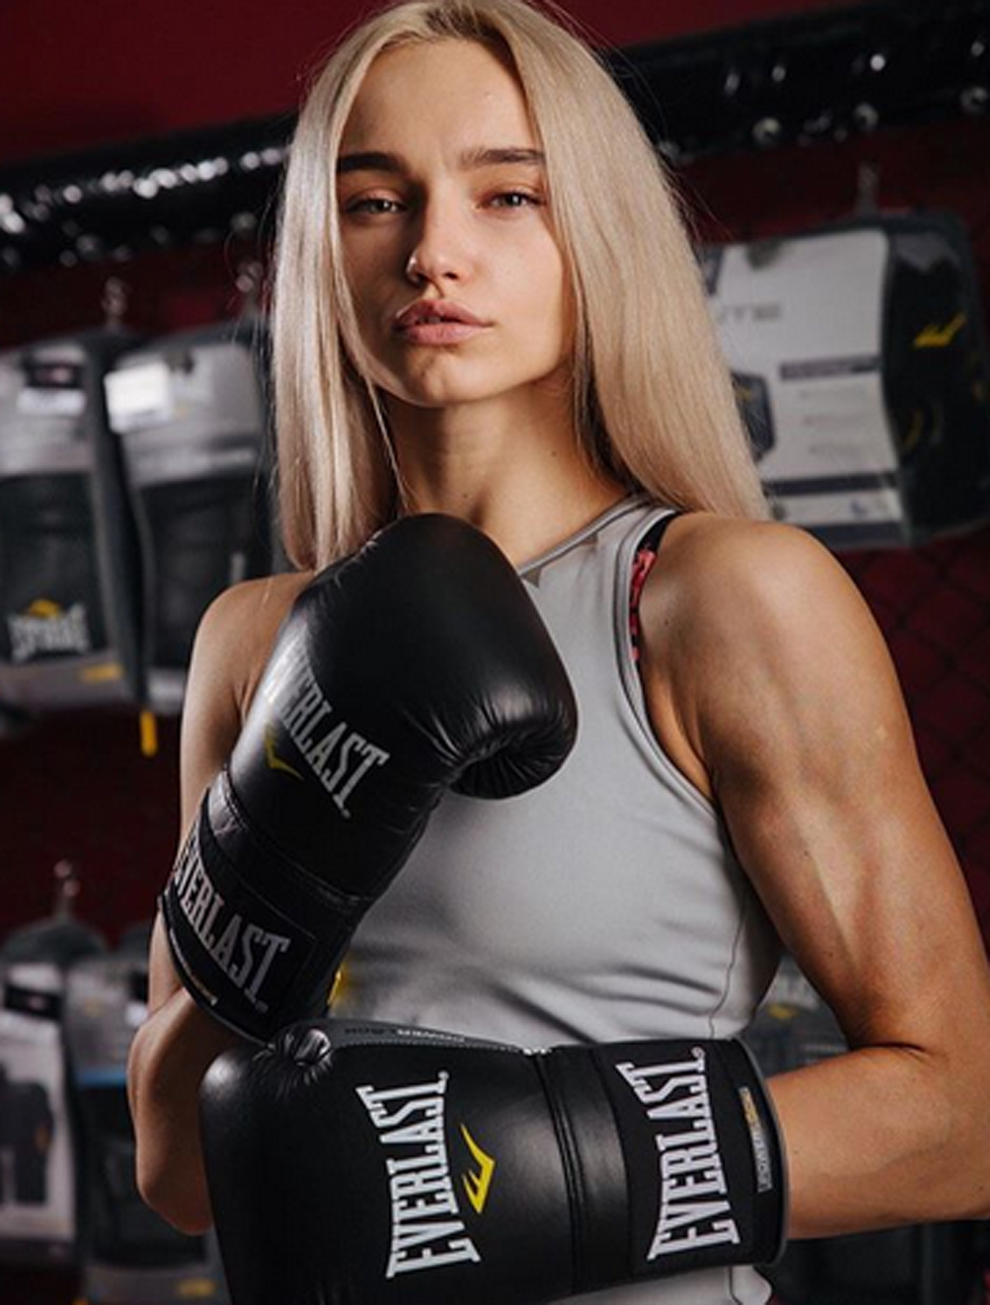 10 Hottest Female Boxers - Bank2home.com